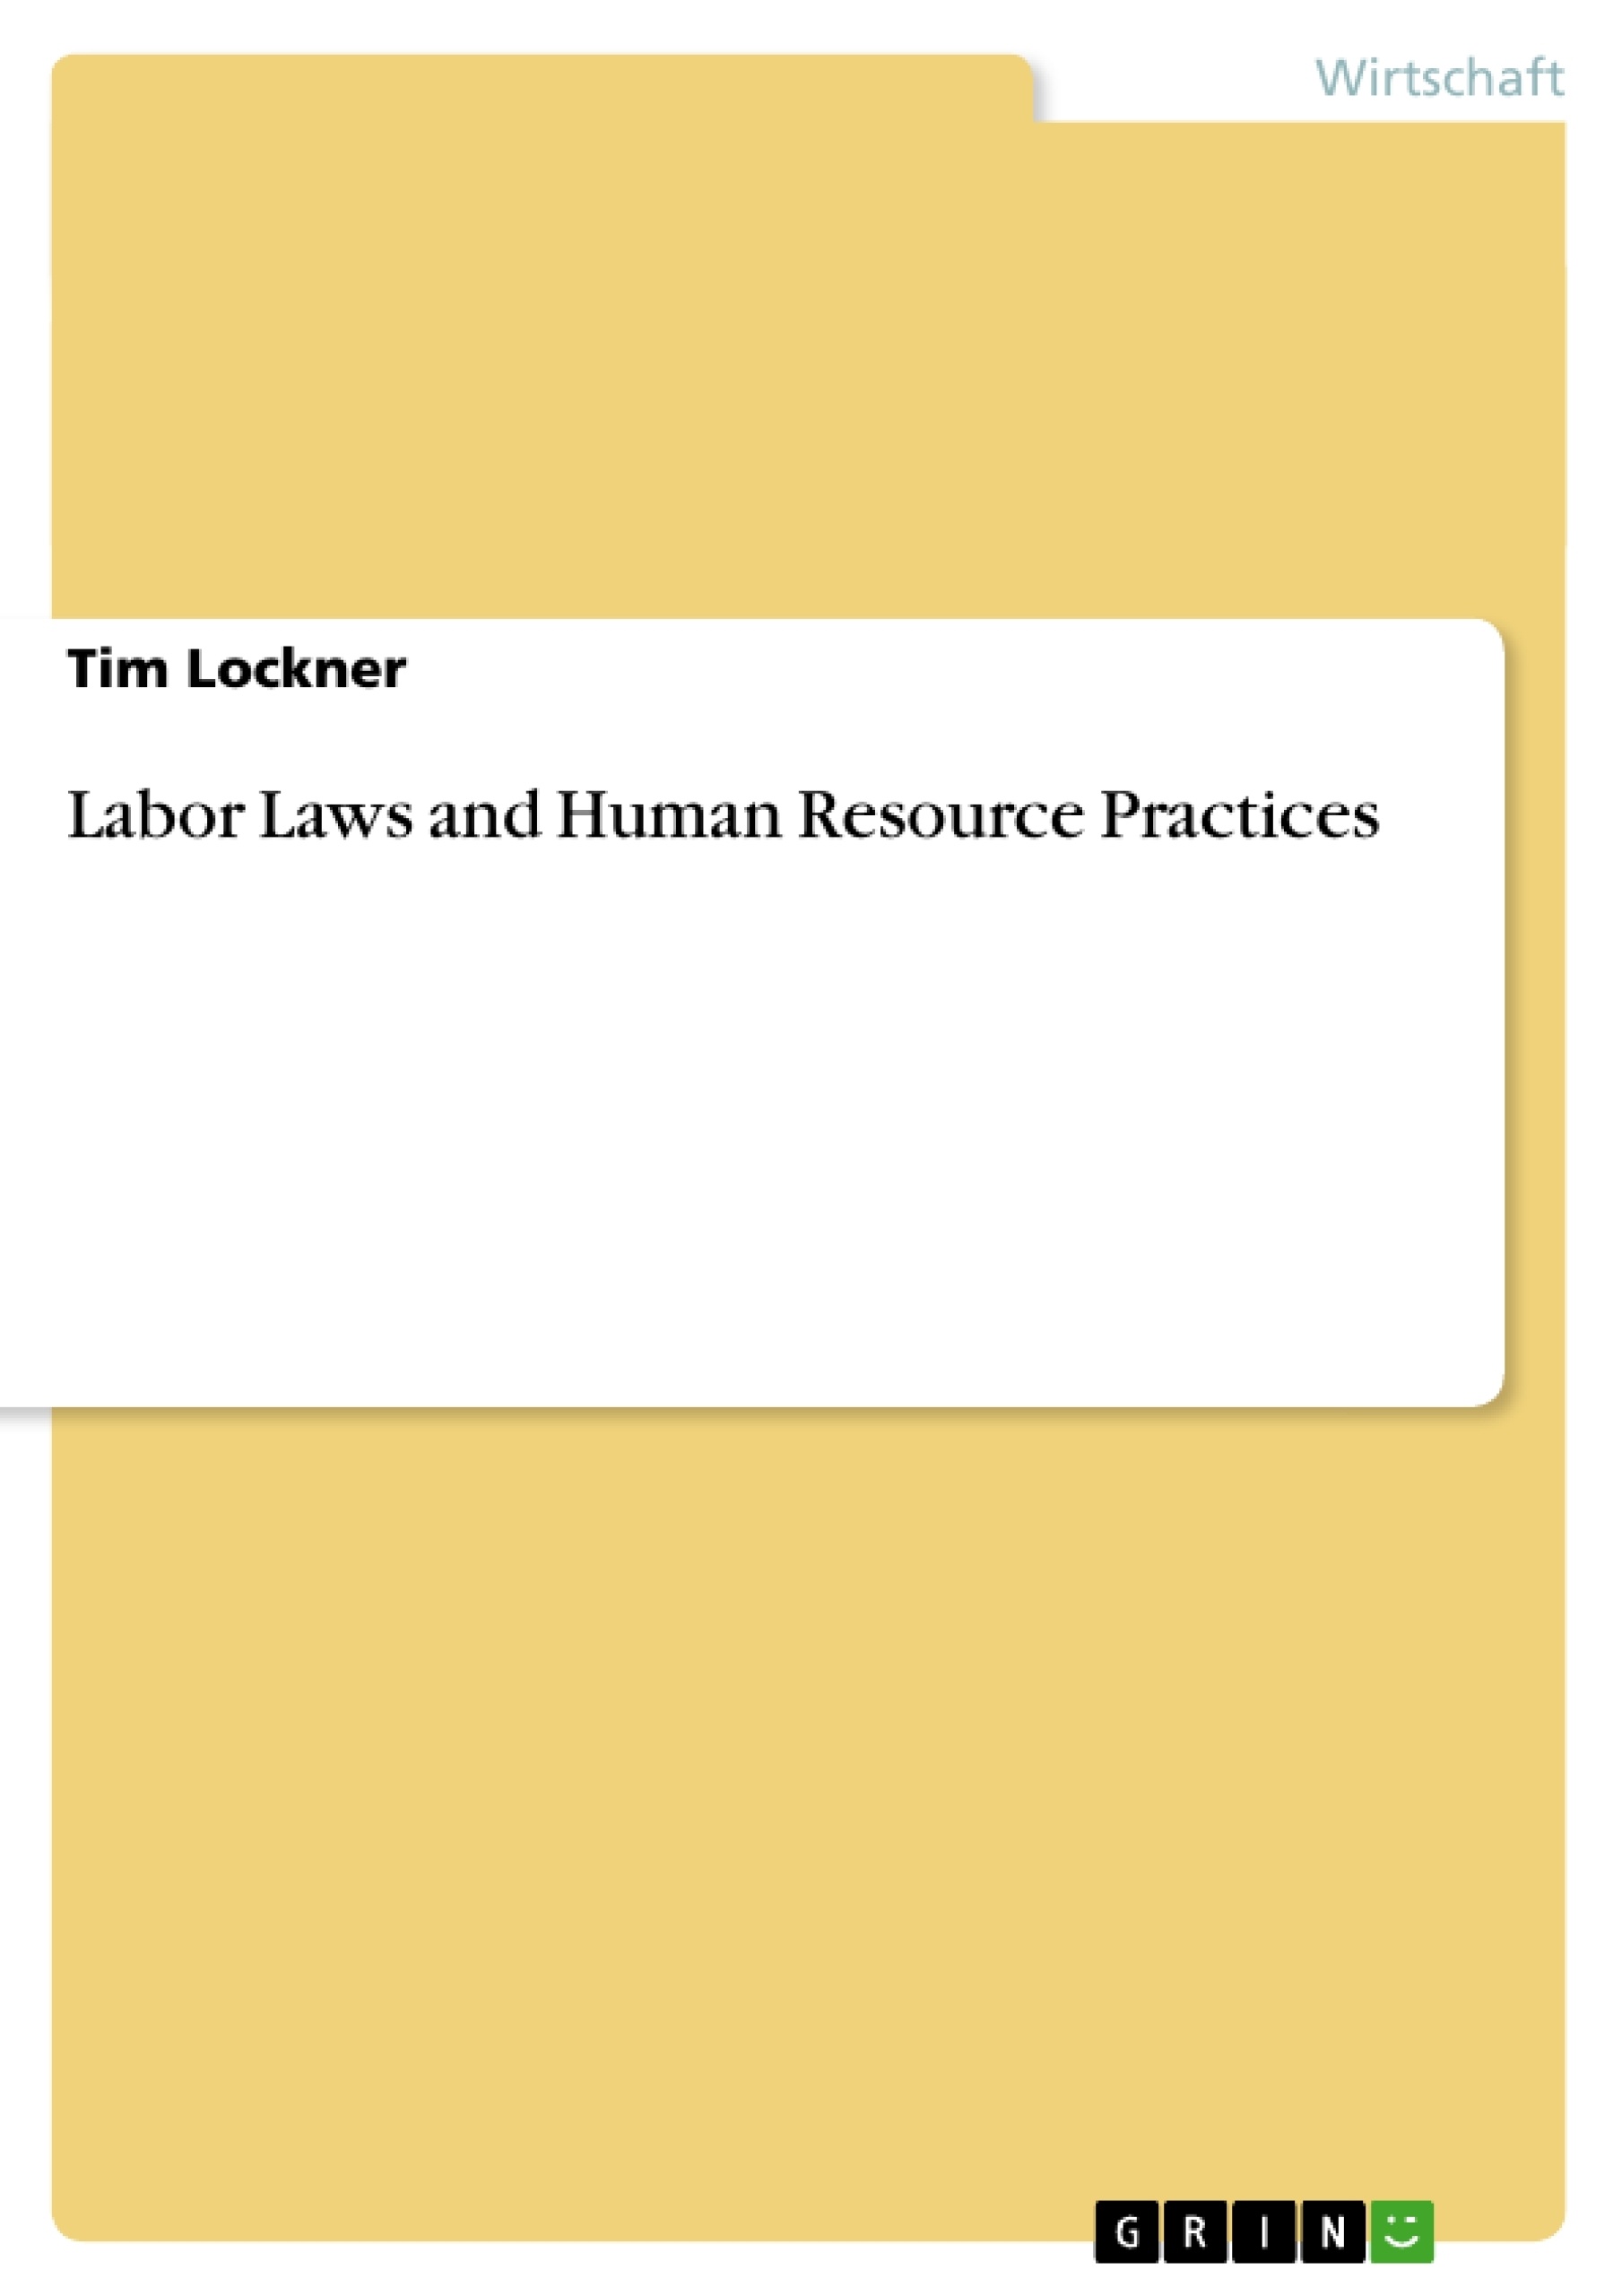 Titre: Labor Laws and Human Resource Practices